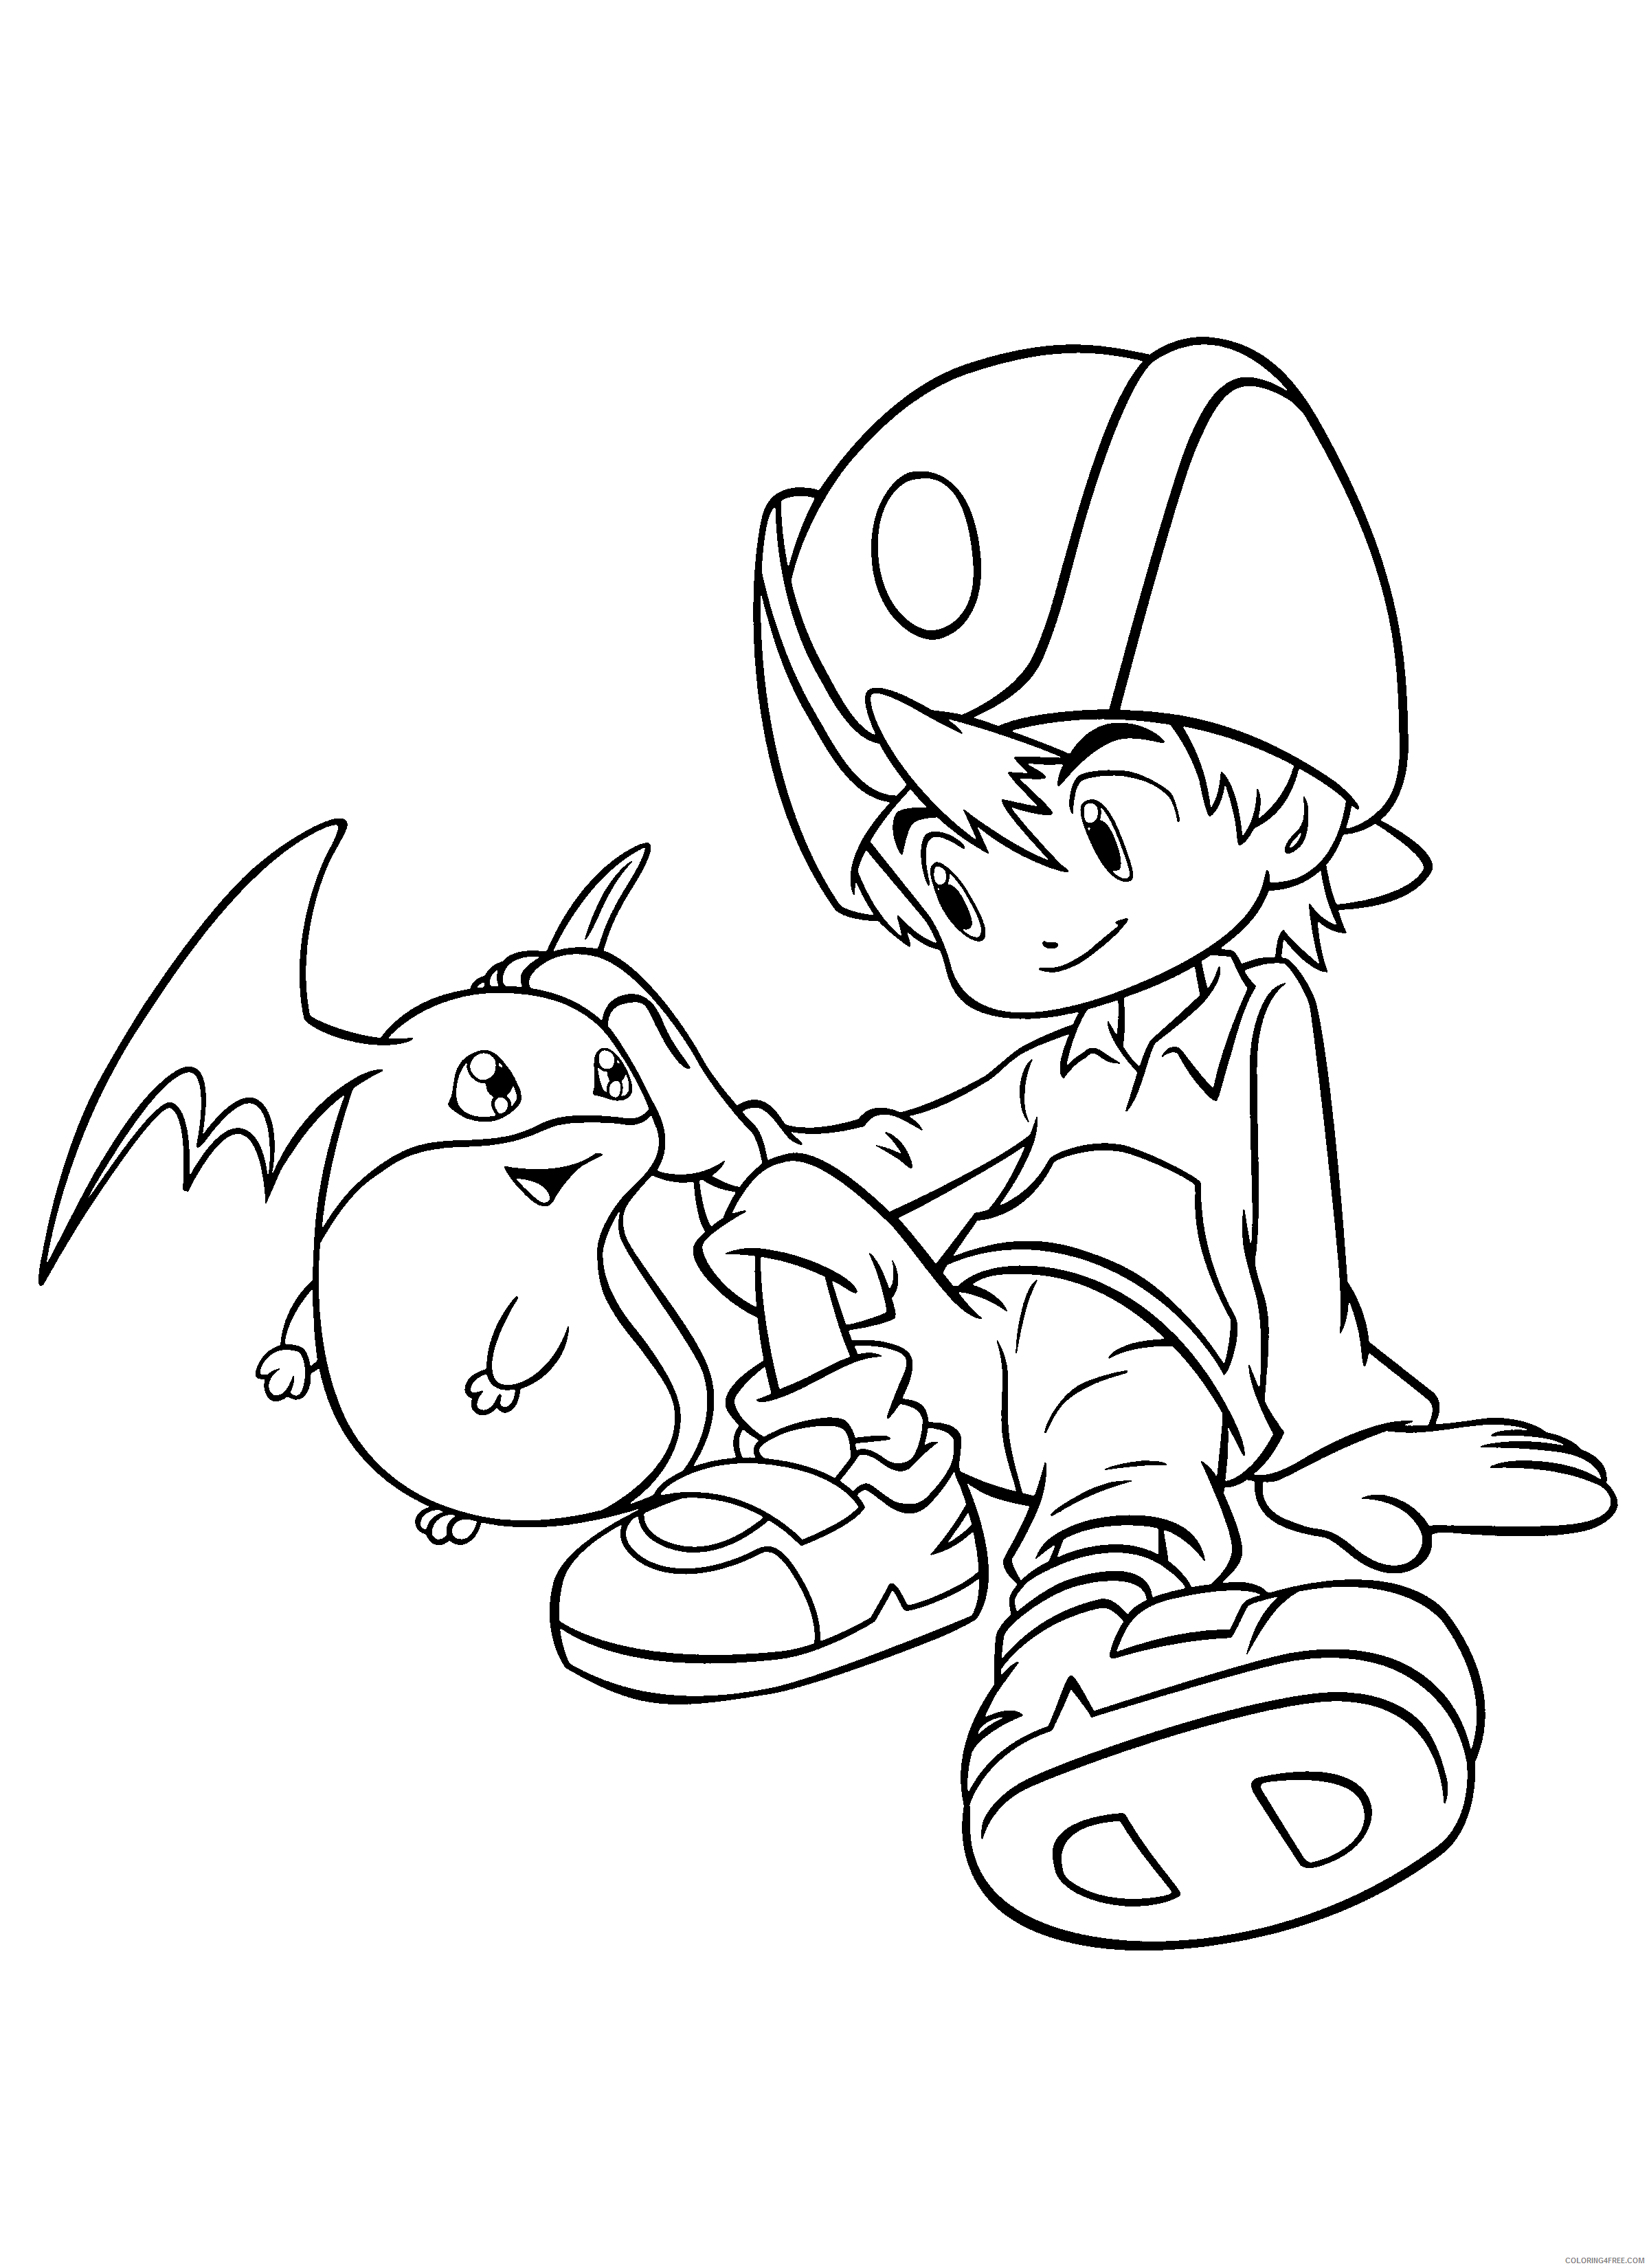 Digimon Printable Coloring Pages Anime digimon 183 2021 0272 Coloring4free